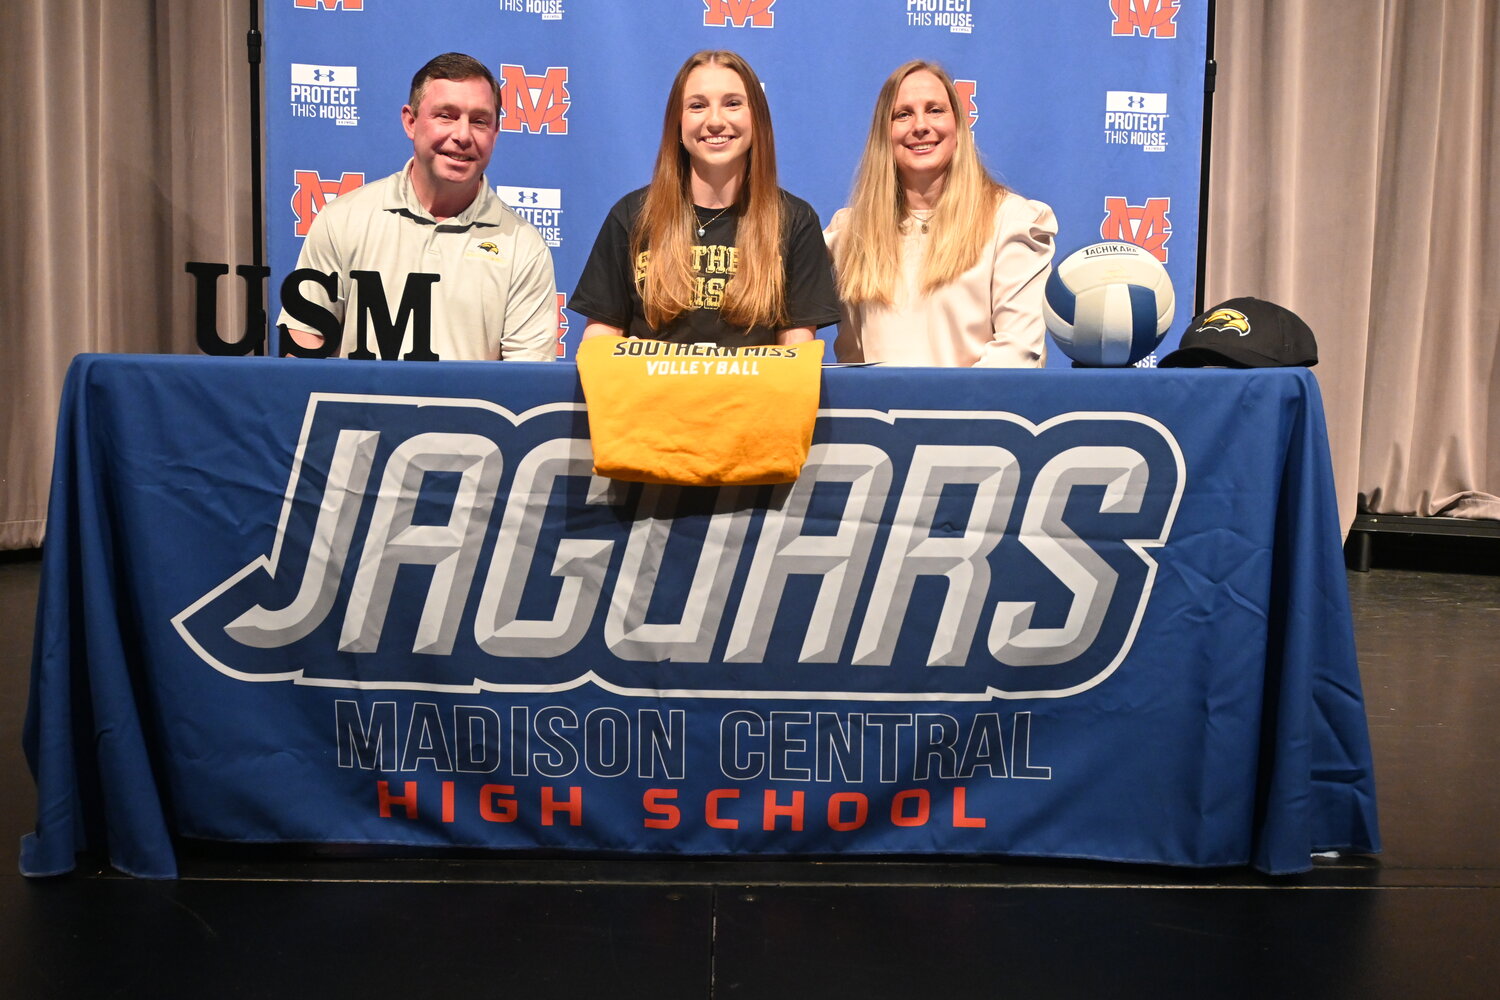 Madison Central High School senior Lindsey Smith signed a national letter of intent to play volleyball at the University of Southern Mississippi. Seated left to right are Bobby Smith (dad), Smith, and Christie Smith (mom).